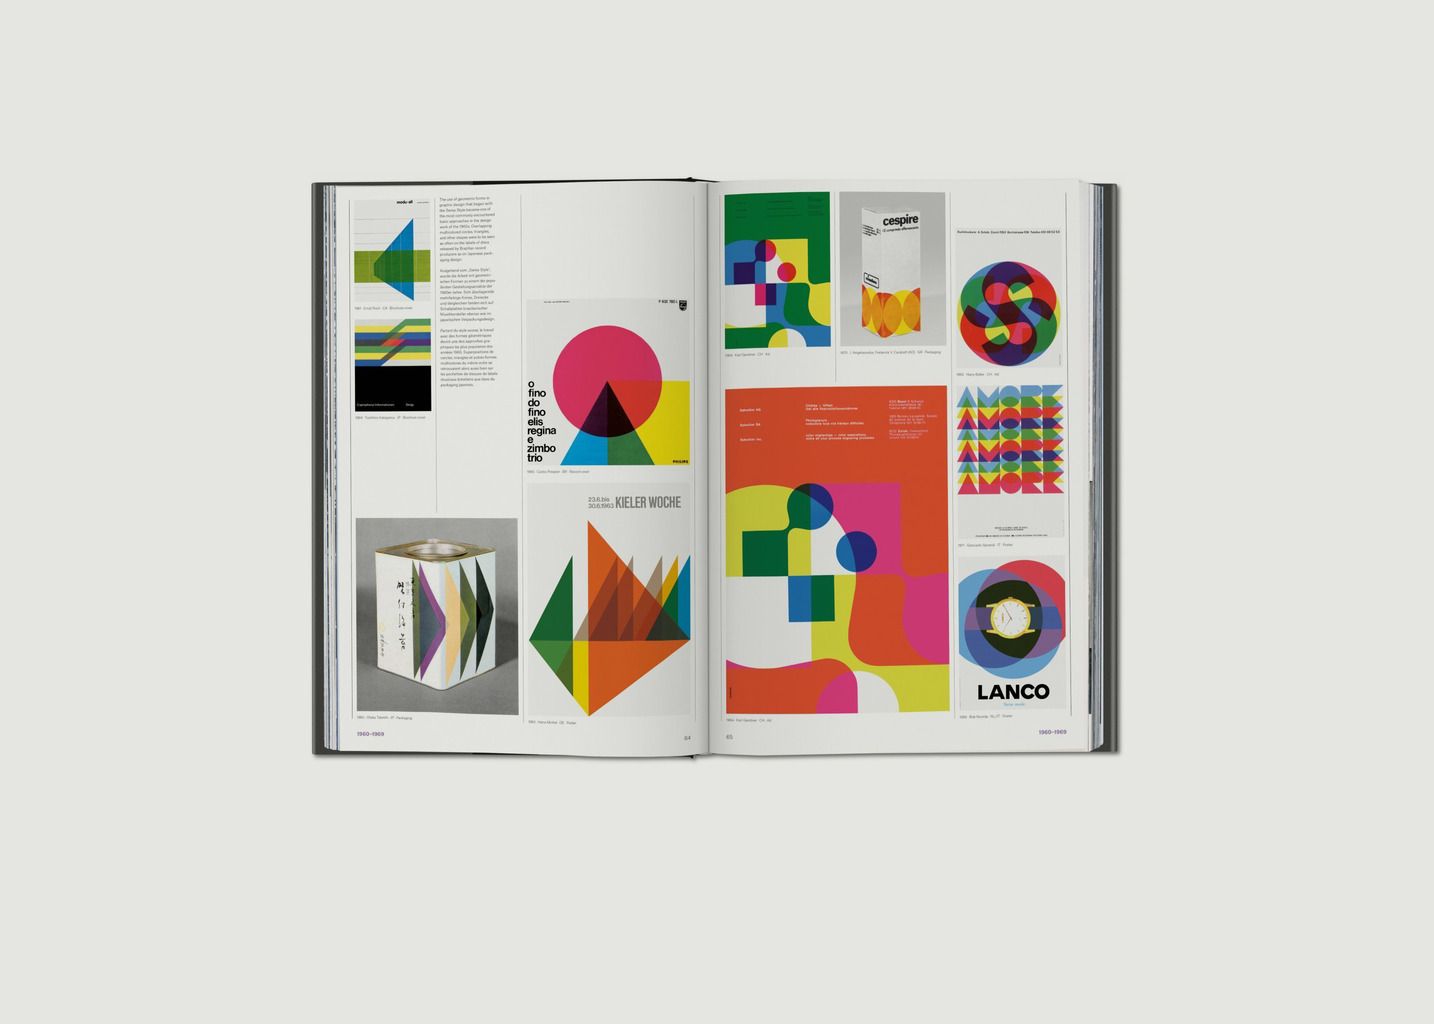 1960 - Today, A History of Graphic Design. Vol 2. - Taschen